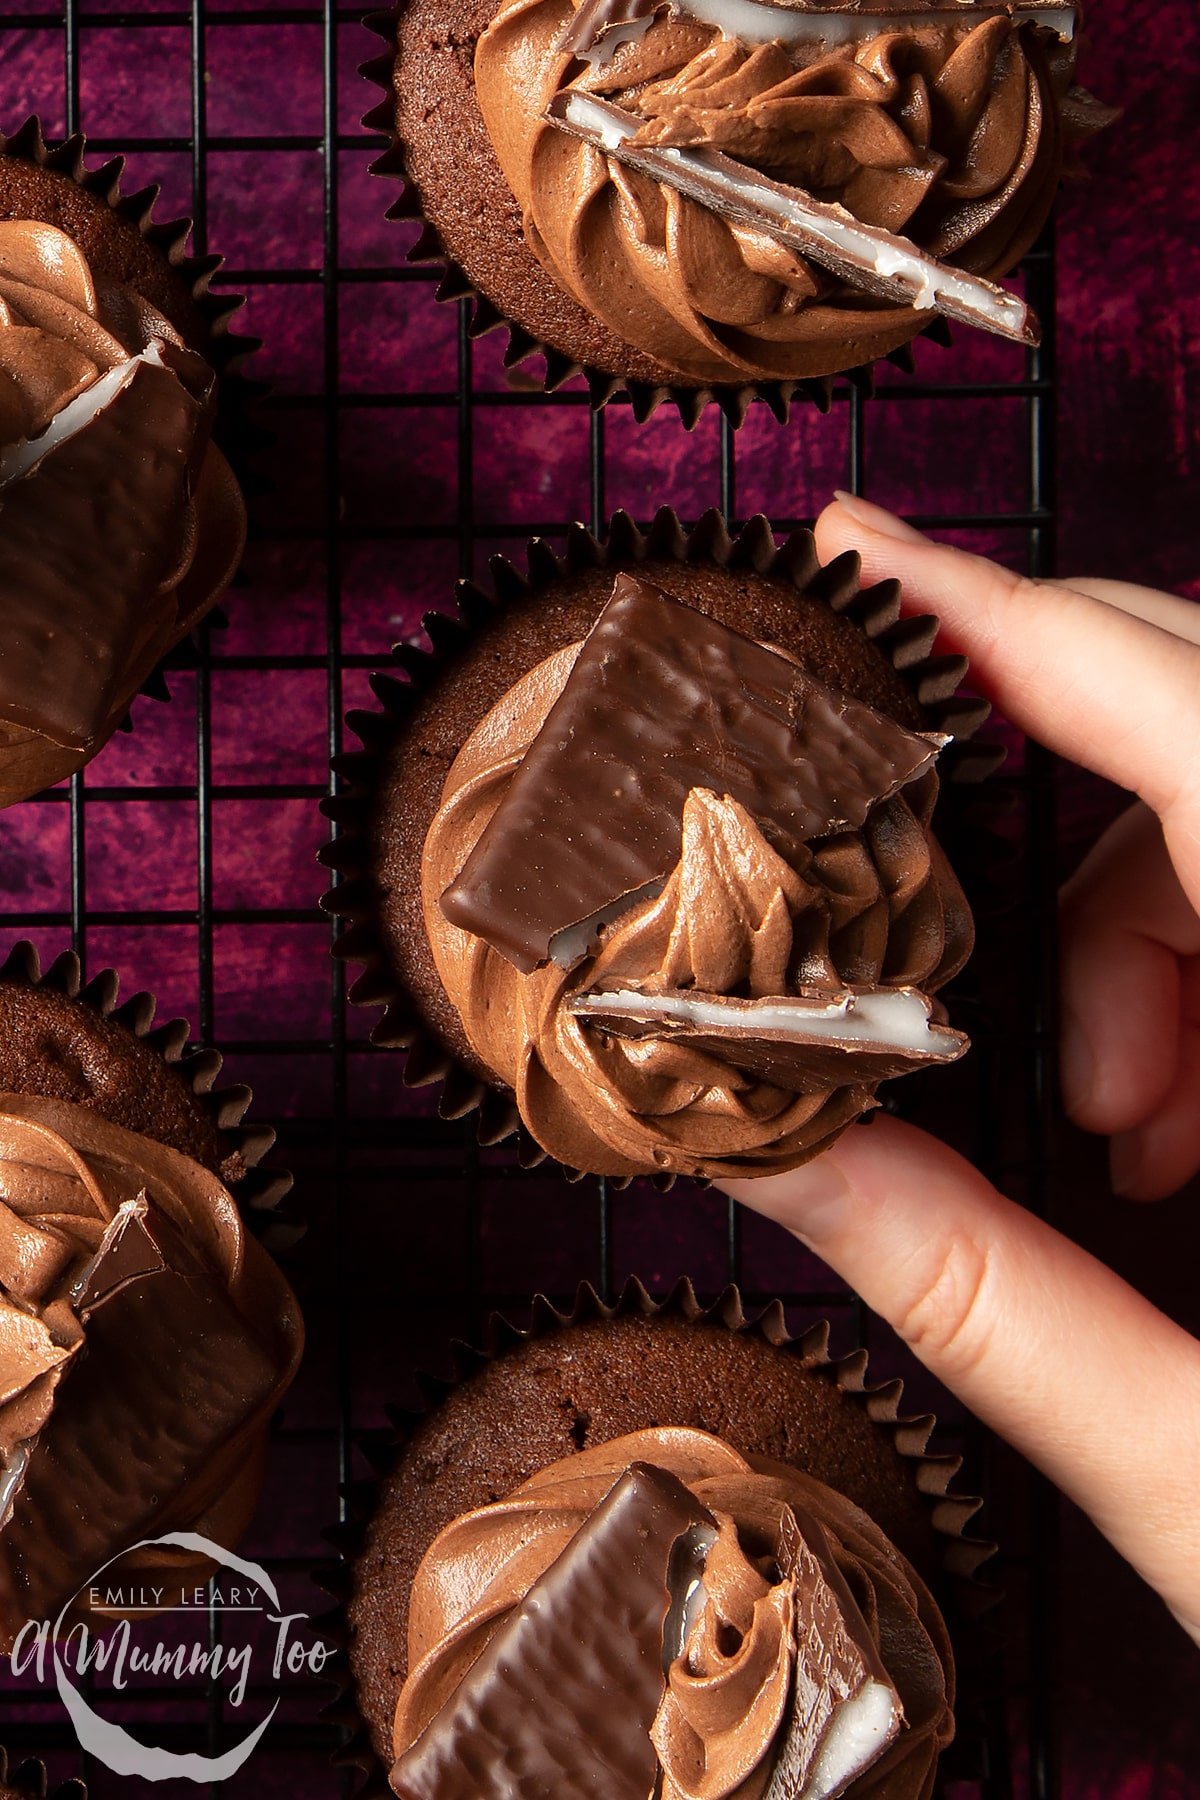 An After Eight cupcake on a cooling rack on purple surface. More cupcakes surround it. A hand reaches for one.